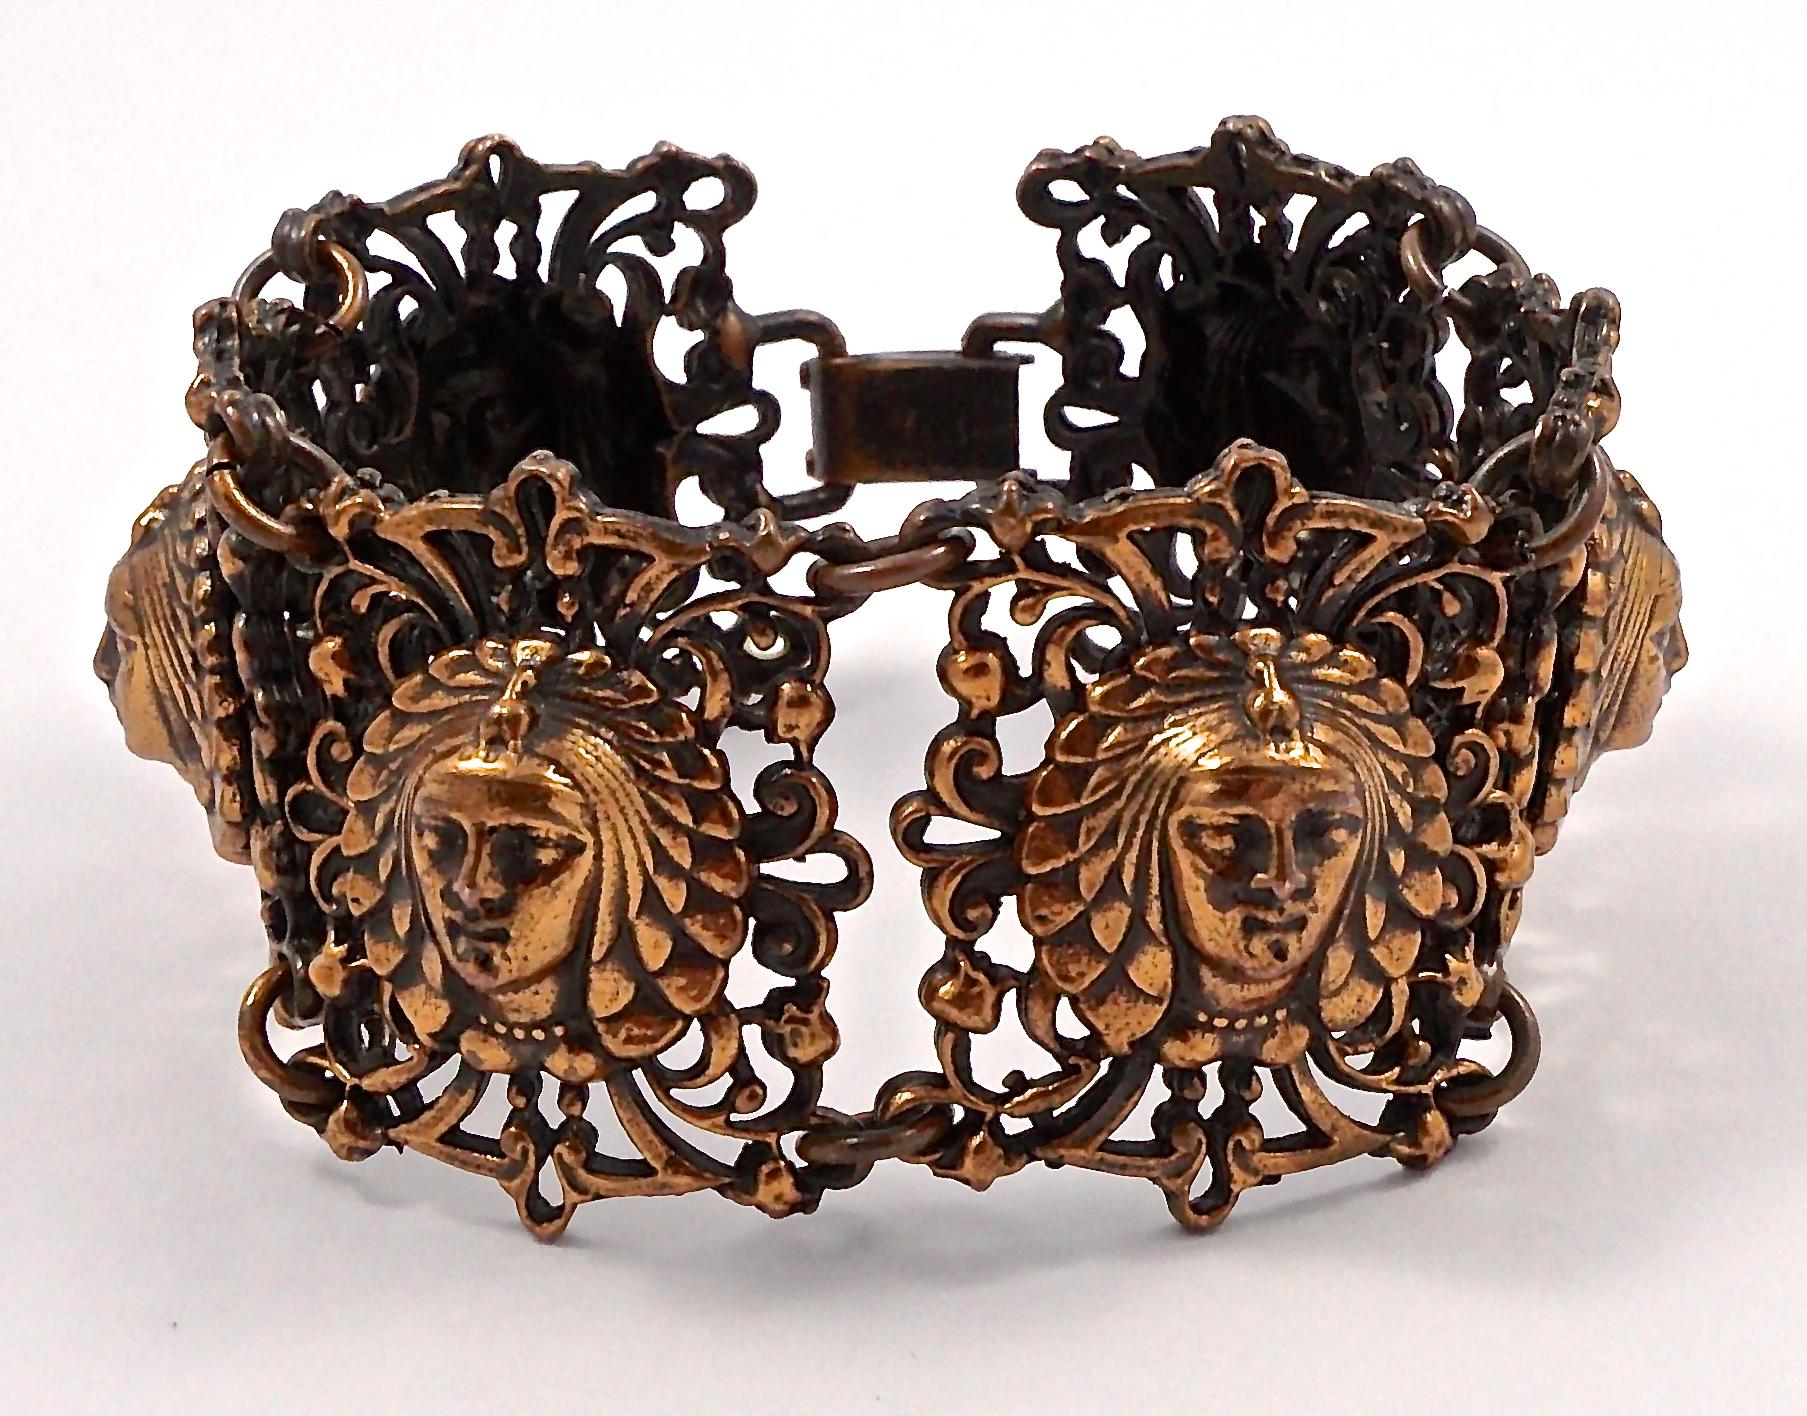 Beautiful copper tone wide link ornate bracelet, featuring six pharaoh women's faces. Measuring length 18.5cm / 7.28 inches by width 3.3cm / 1.3 inches. The bracelet is in very good condition.

This is a stylish vintage copper tone bracelet with a